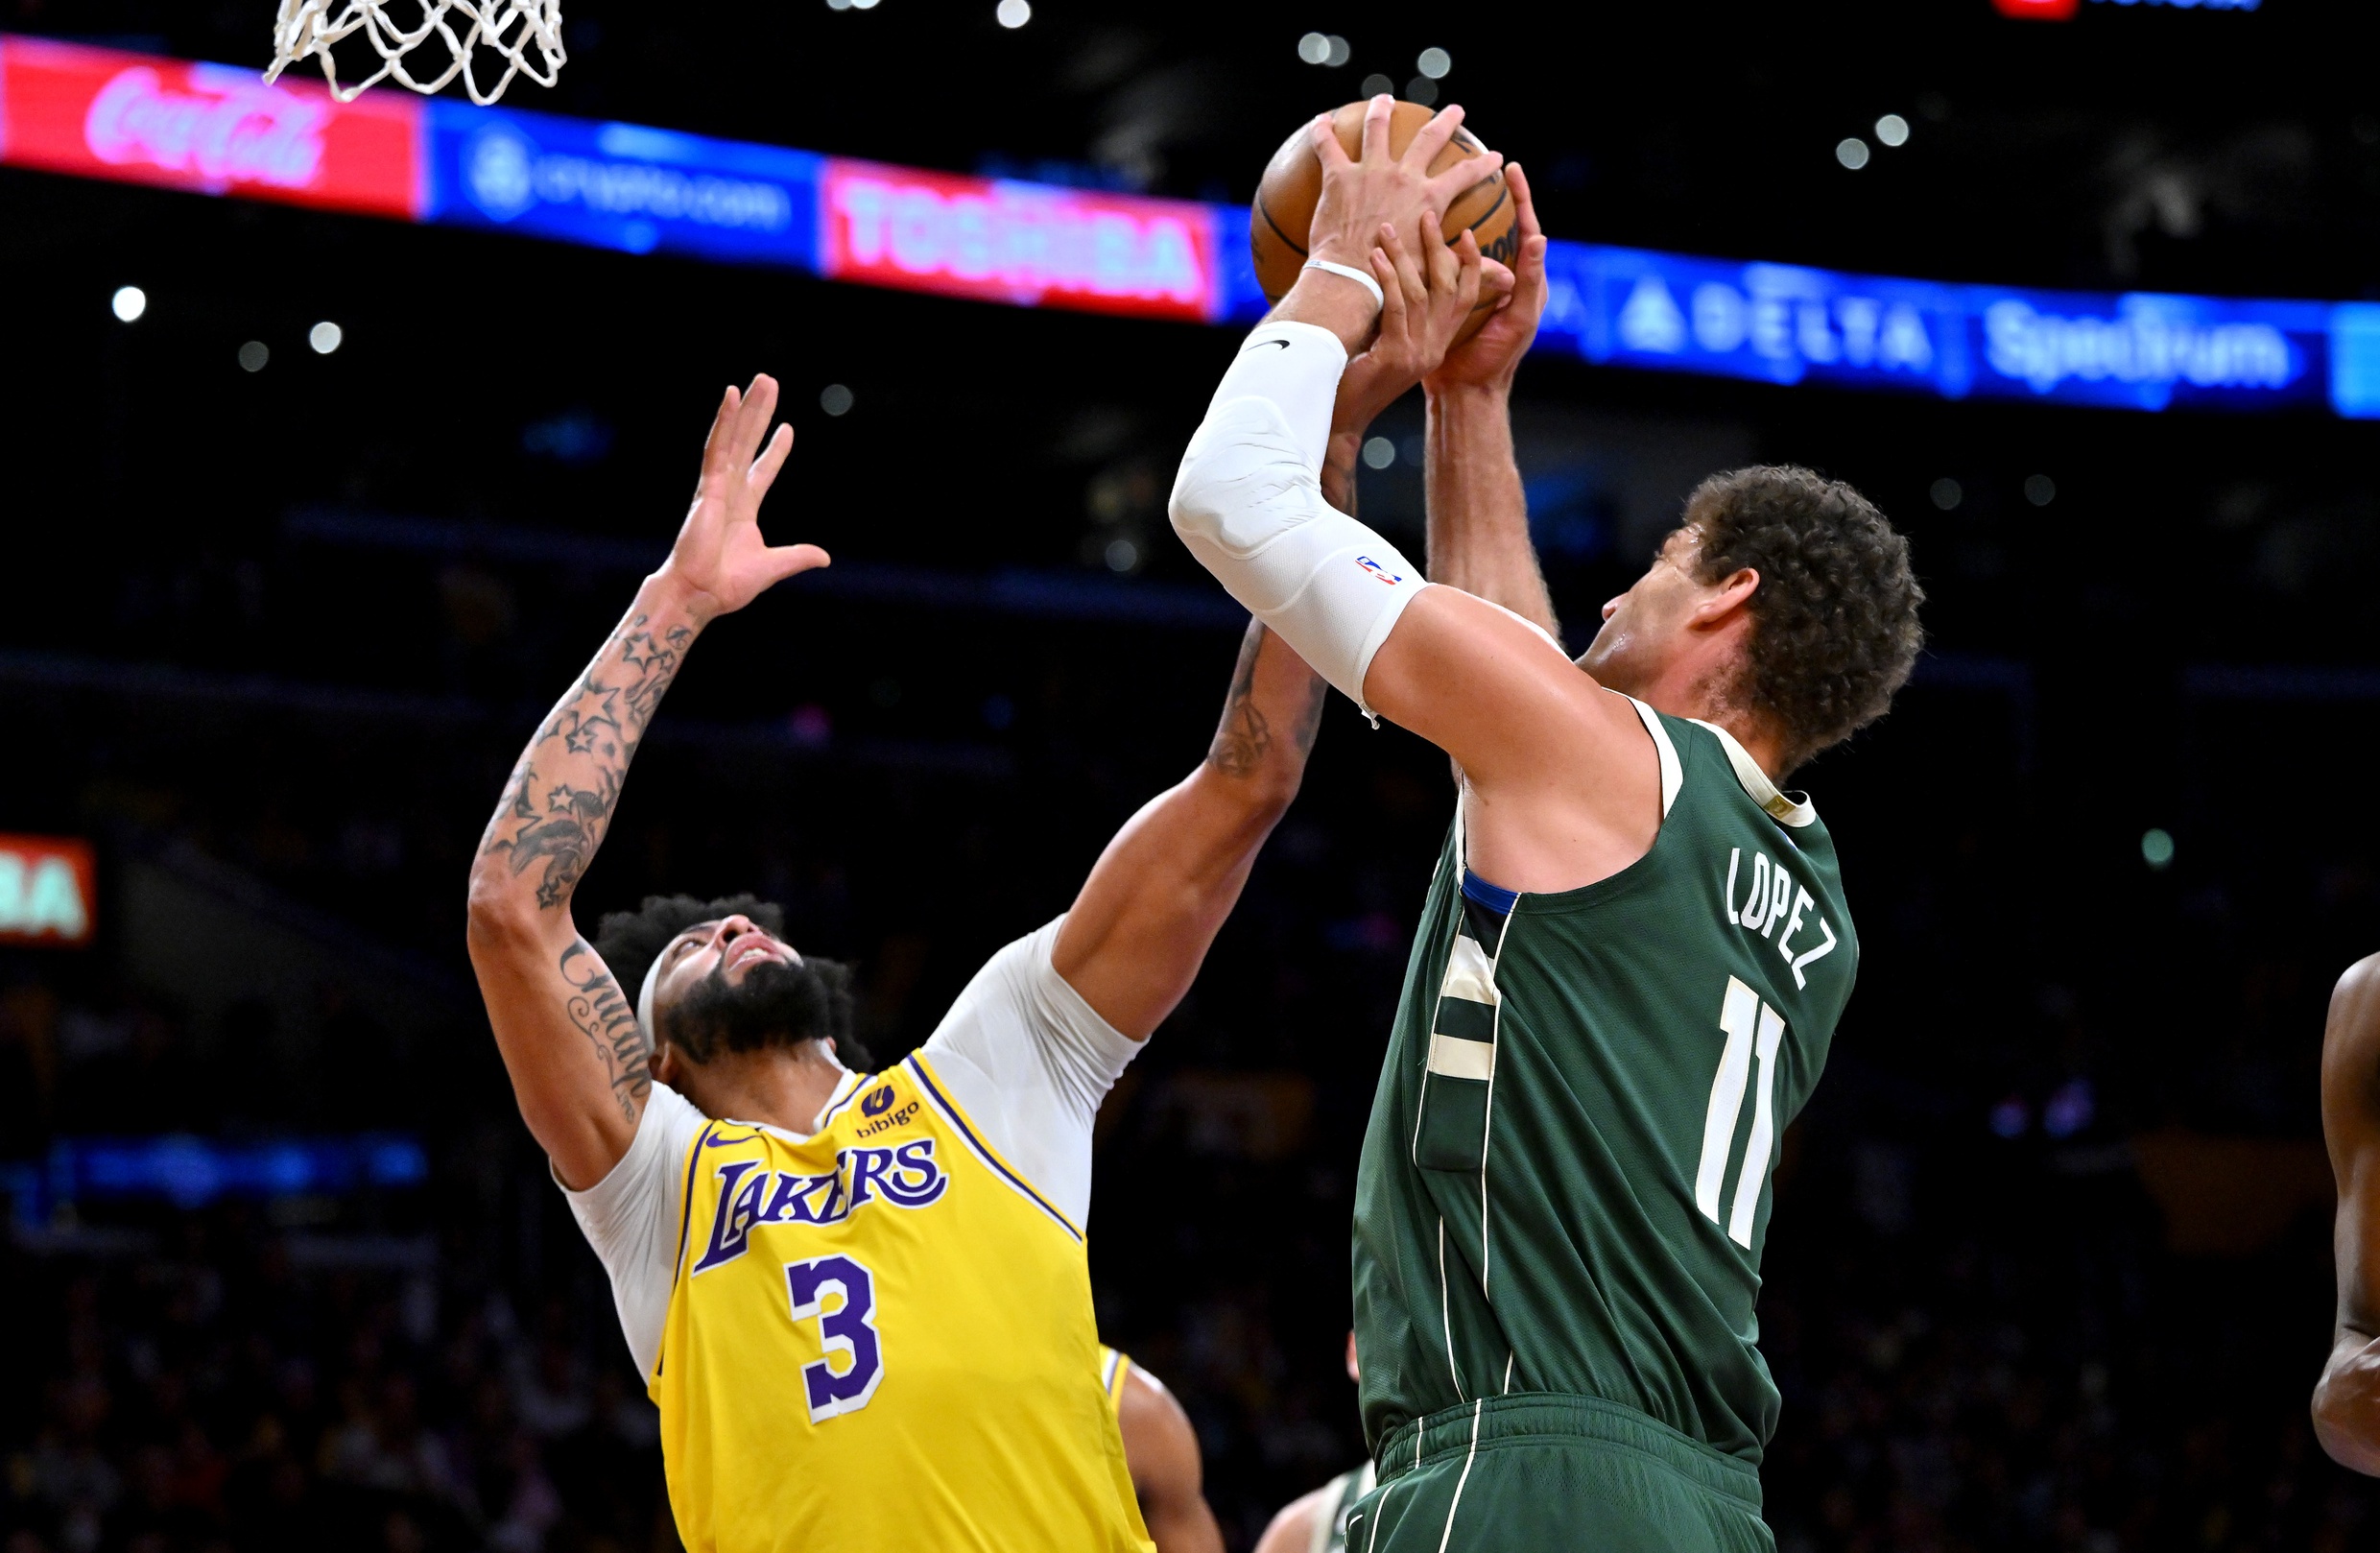 Milwaukee Bucks center Brook Lopez had 9 points and 10 rebounds against the Lakers